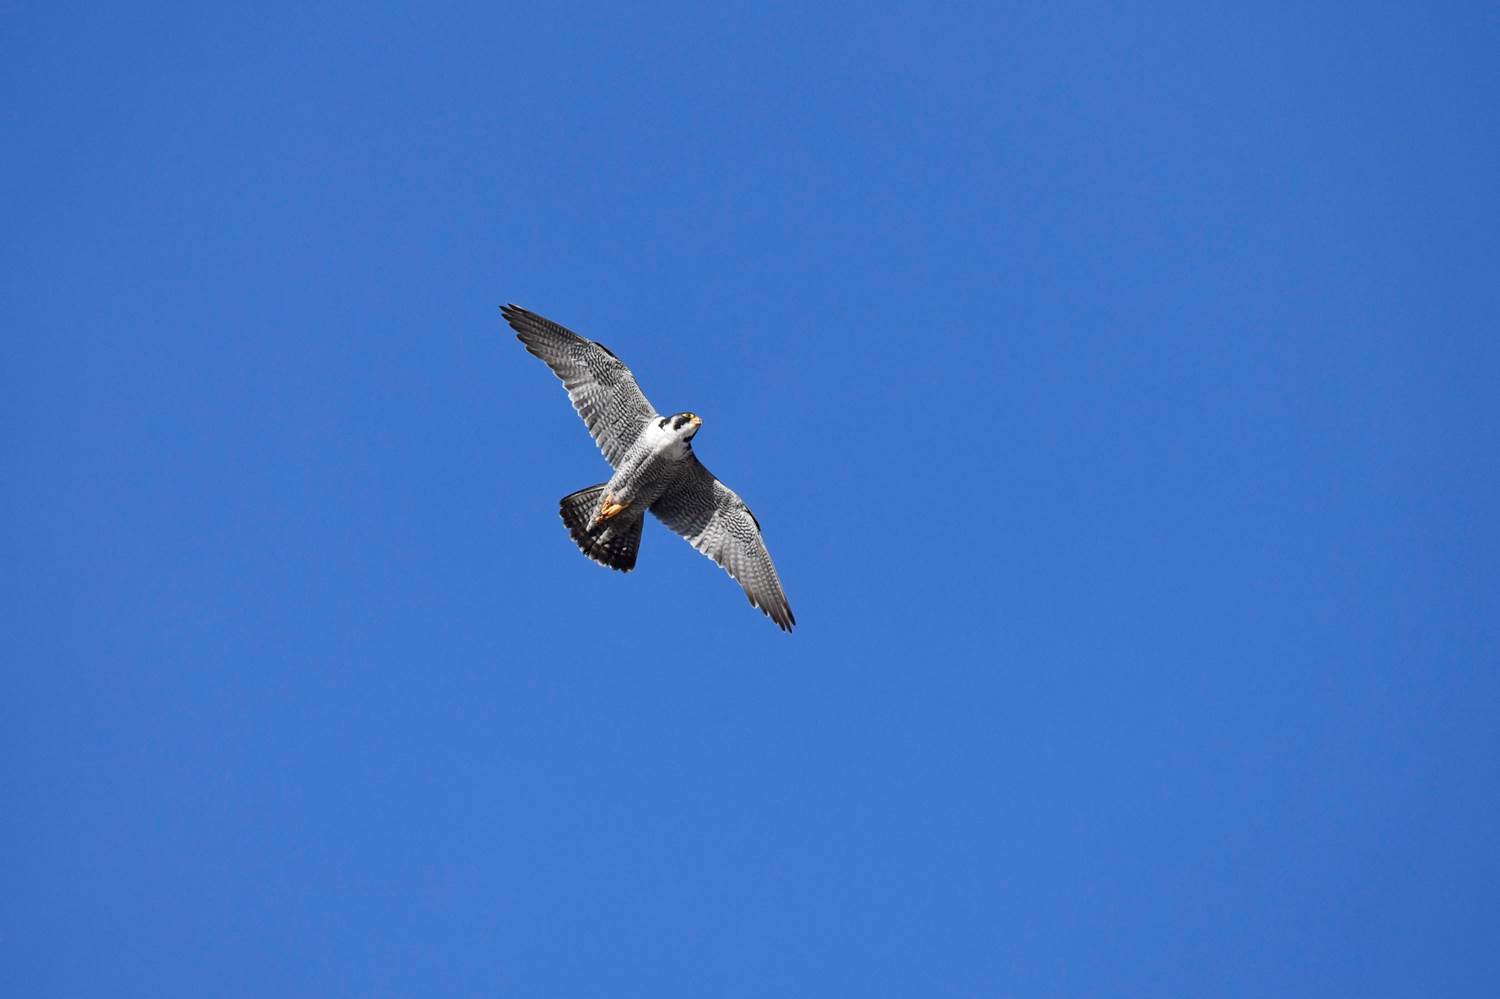 A hawk flying in the sky

Description automatically generated with medium confidence